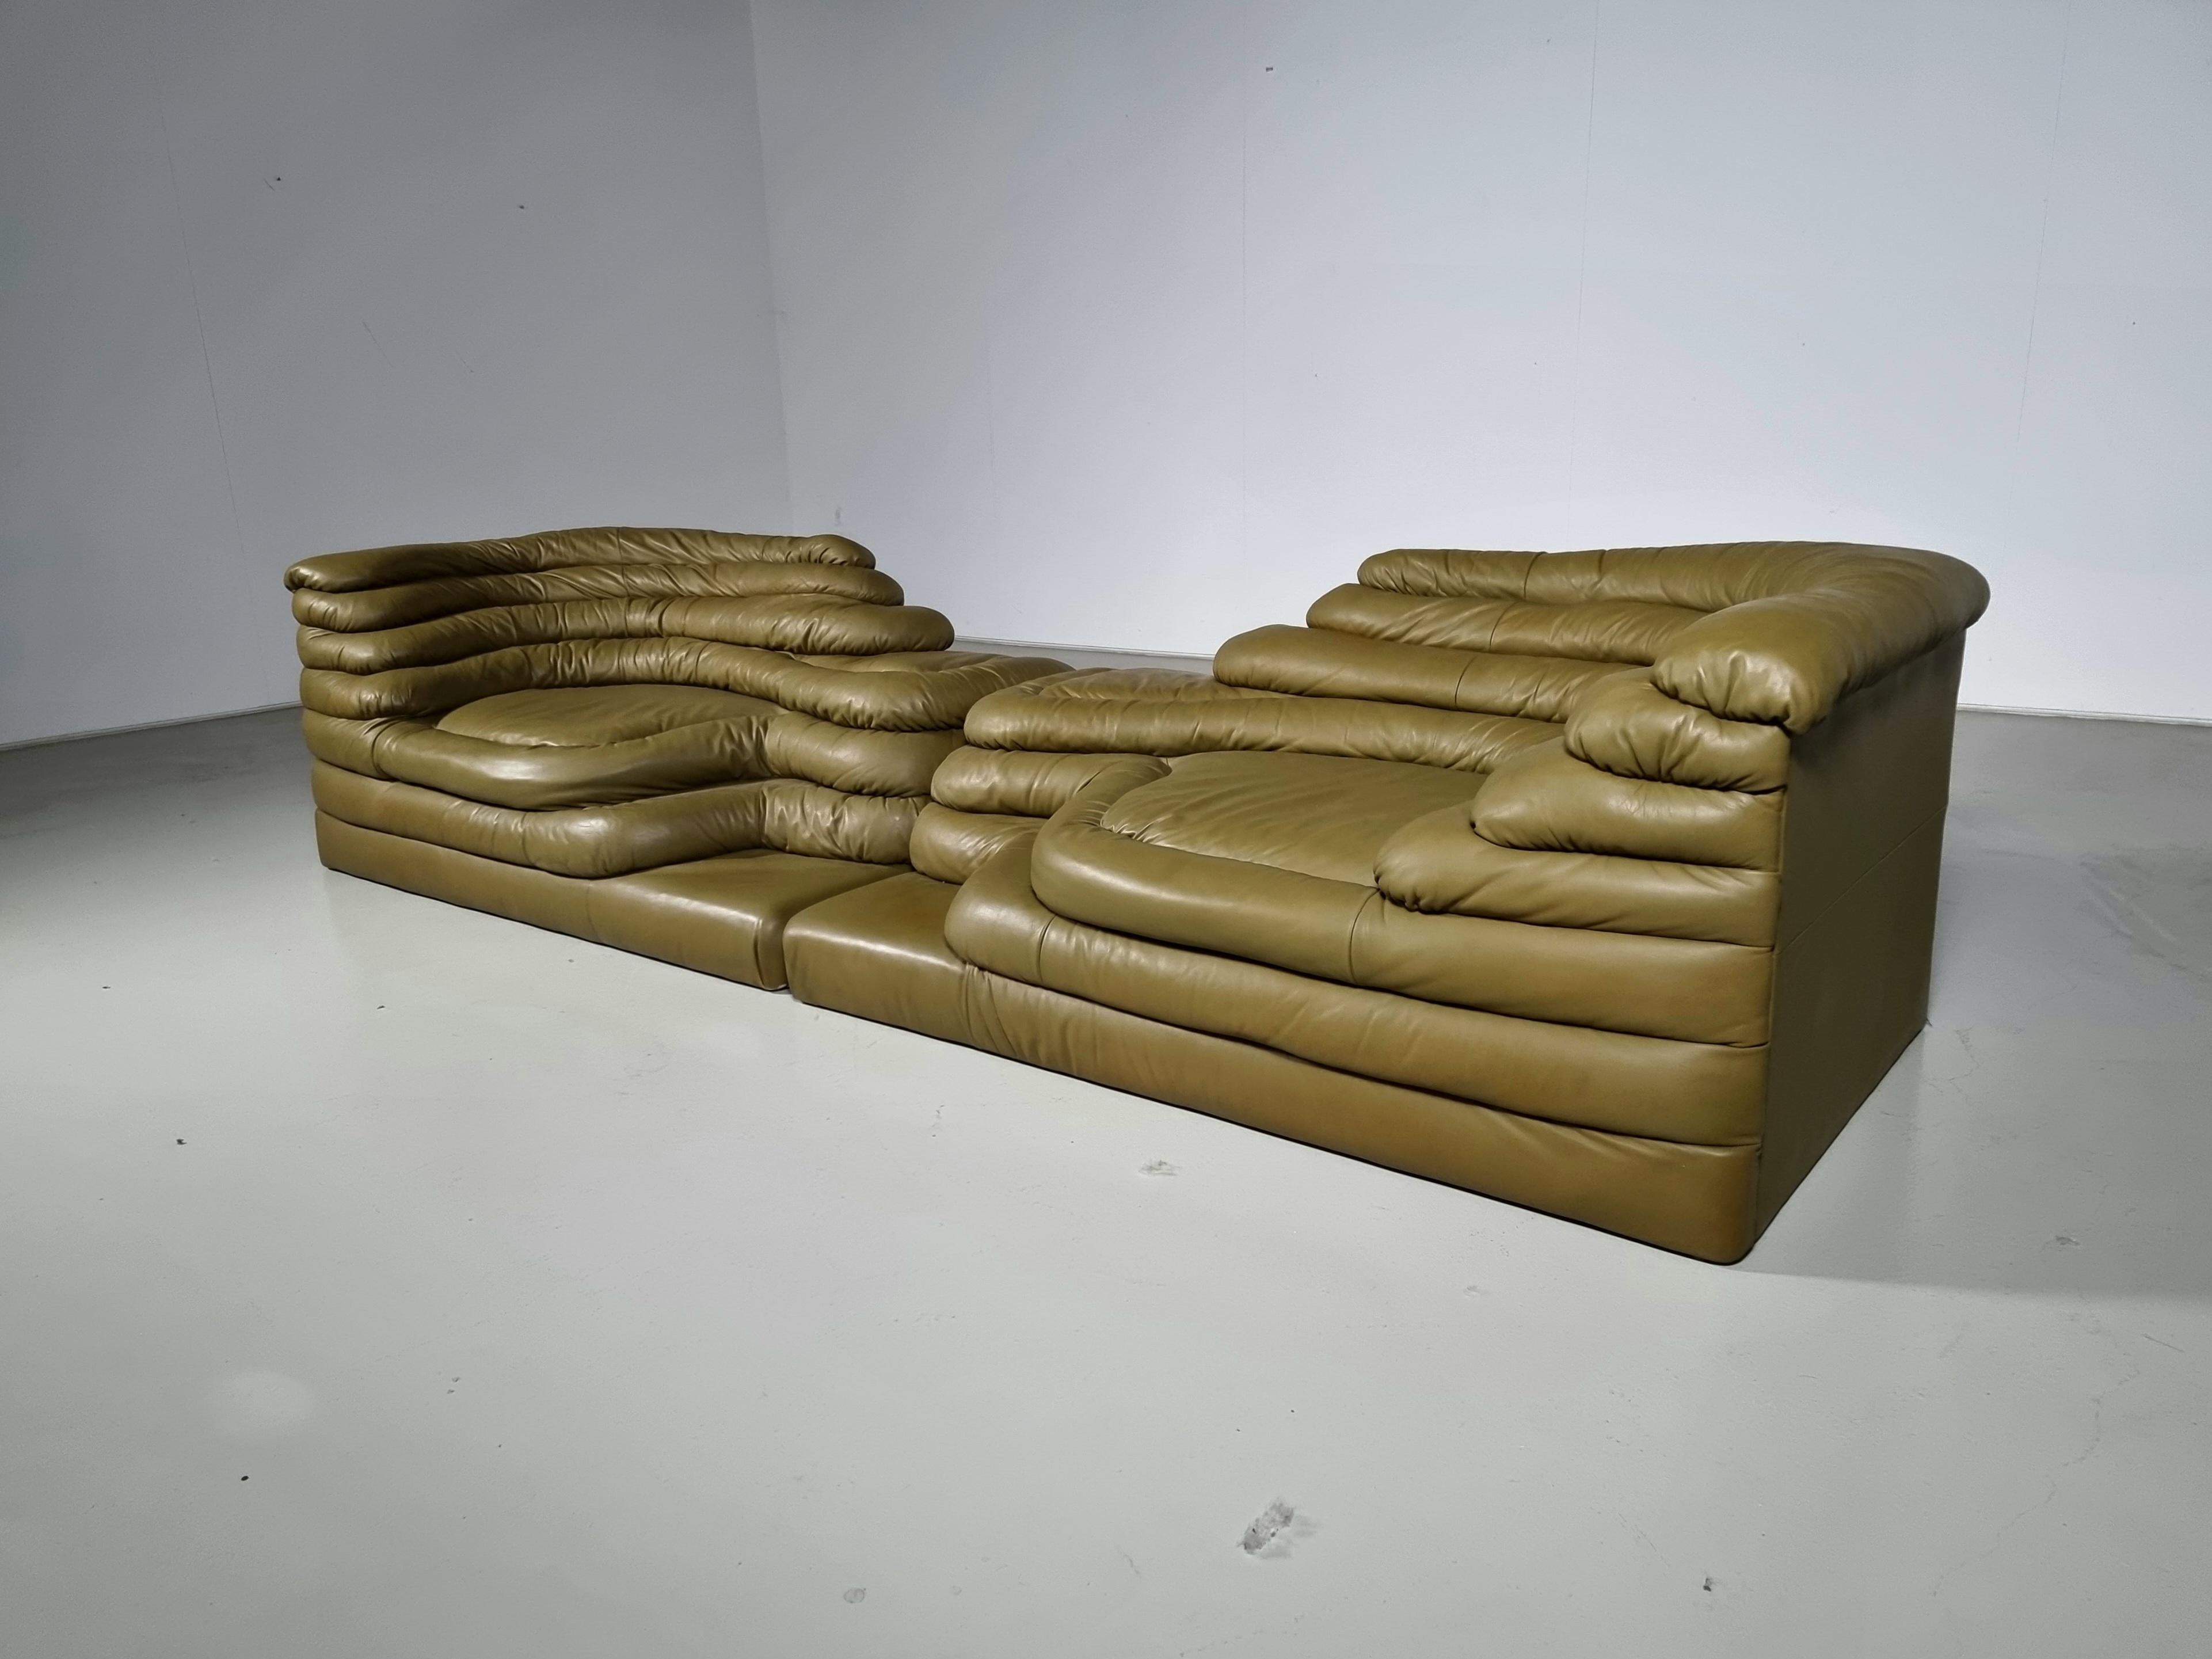 Set of two DS-1025 Terrazza Landscape sofa elements in olive green leather, by Ubald Klug for De Sede in the 1970s. The design of this sofa was inspired by waterfalls and hills which are clearly visible in the layering of the sofa. Like terraced